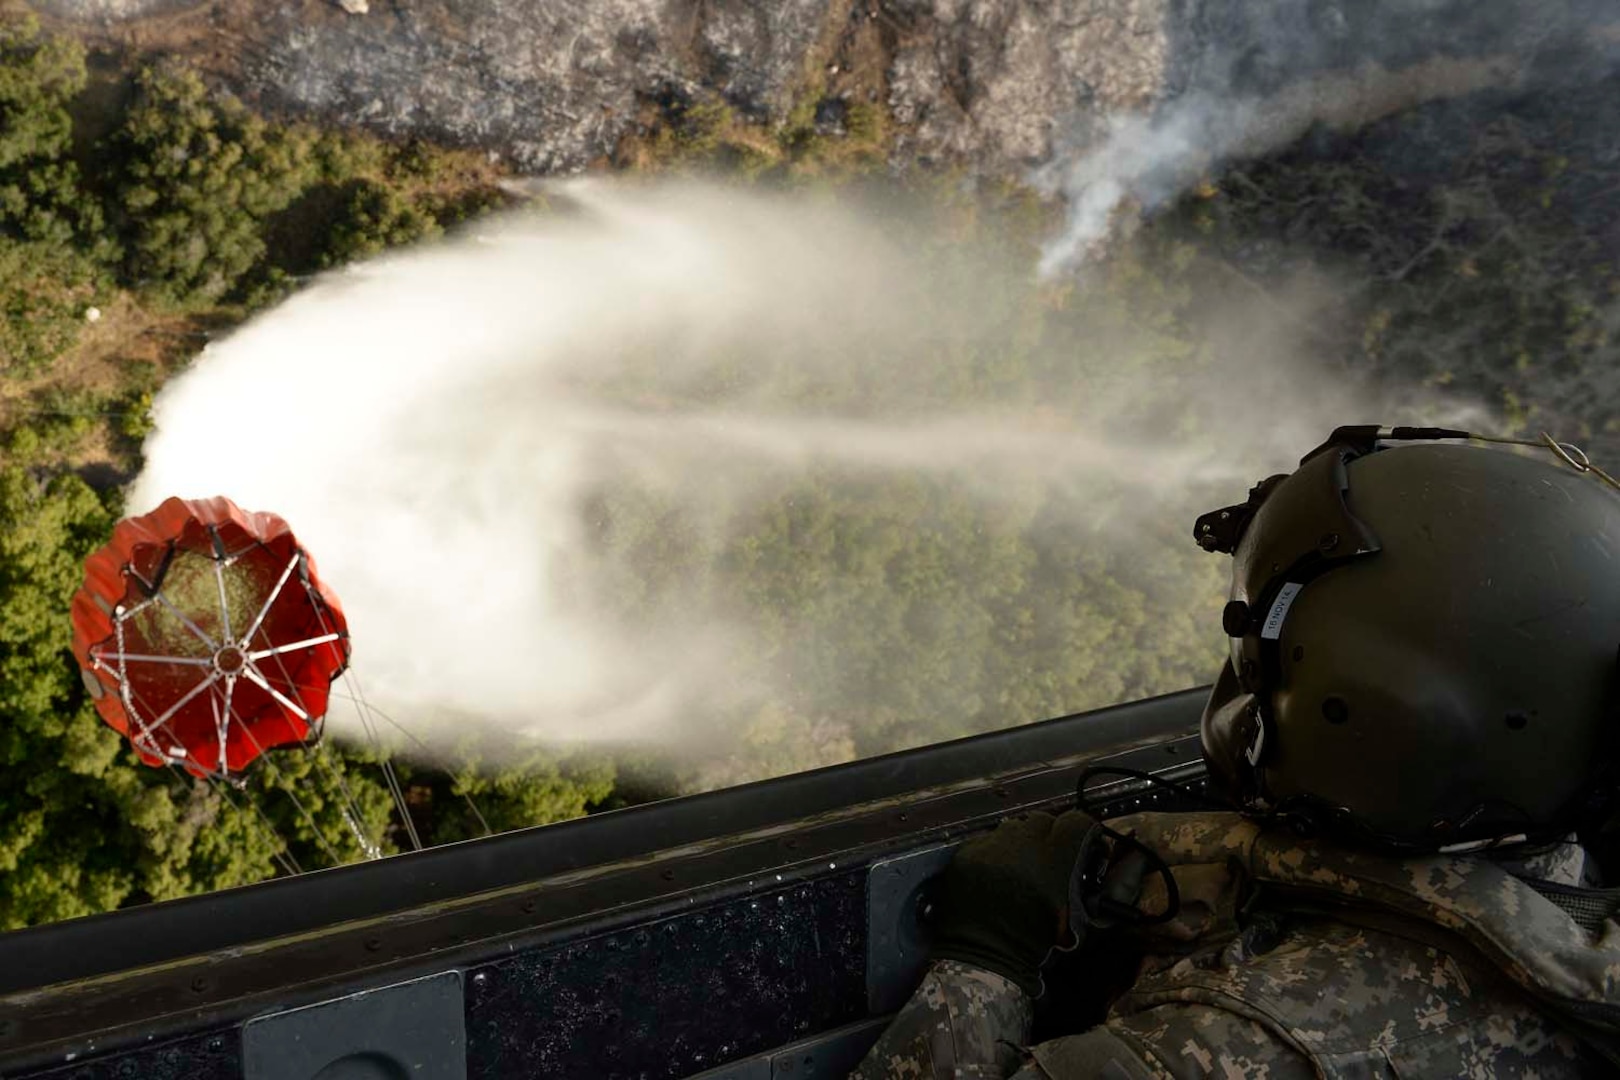 Utah Army National Guard Staff Sgt. Jason Towensend, 2-211 Aviation Battalion, drops water on the Tunnel Hallow fire near Morgan, Utah, July 23, 2014. The two HH-60 Black Hawks assisting with the fire were able to drop more than 29,000 gallons of water on the fire. 
